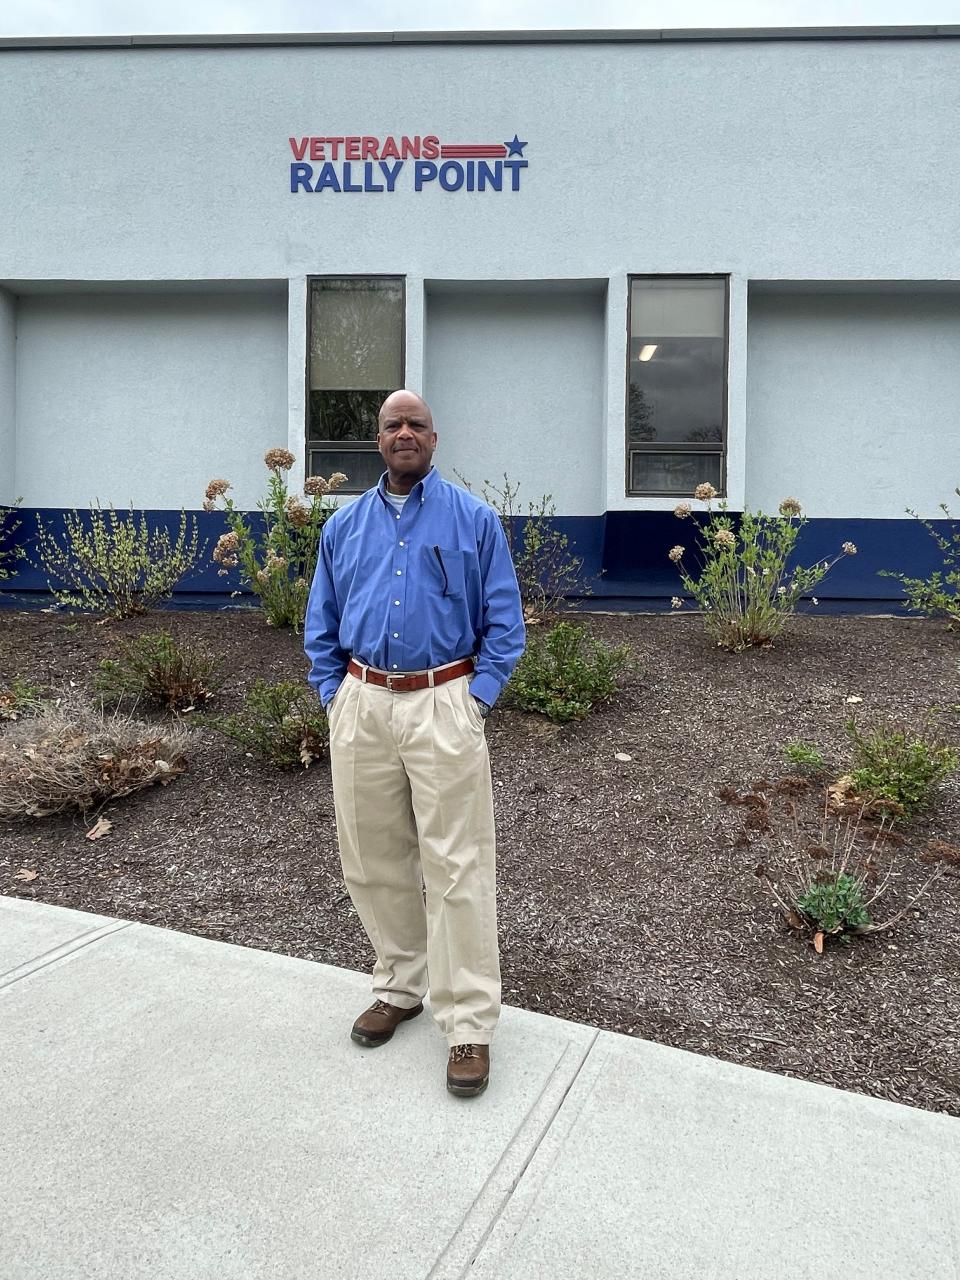 Norwich resident TJ Smith outside the Veterans Rally Point. He is one of 22 veterans benefiting from a partnership between EB and Veterans Rally Point to get vets working at EB.